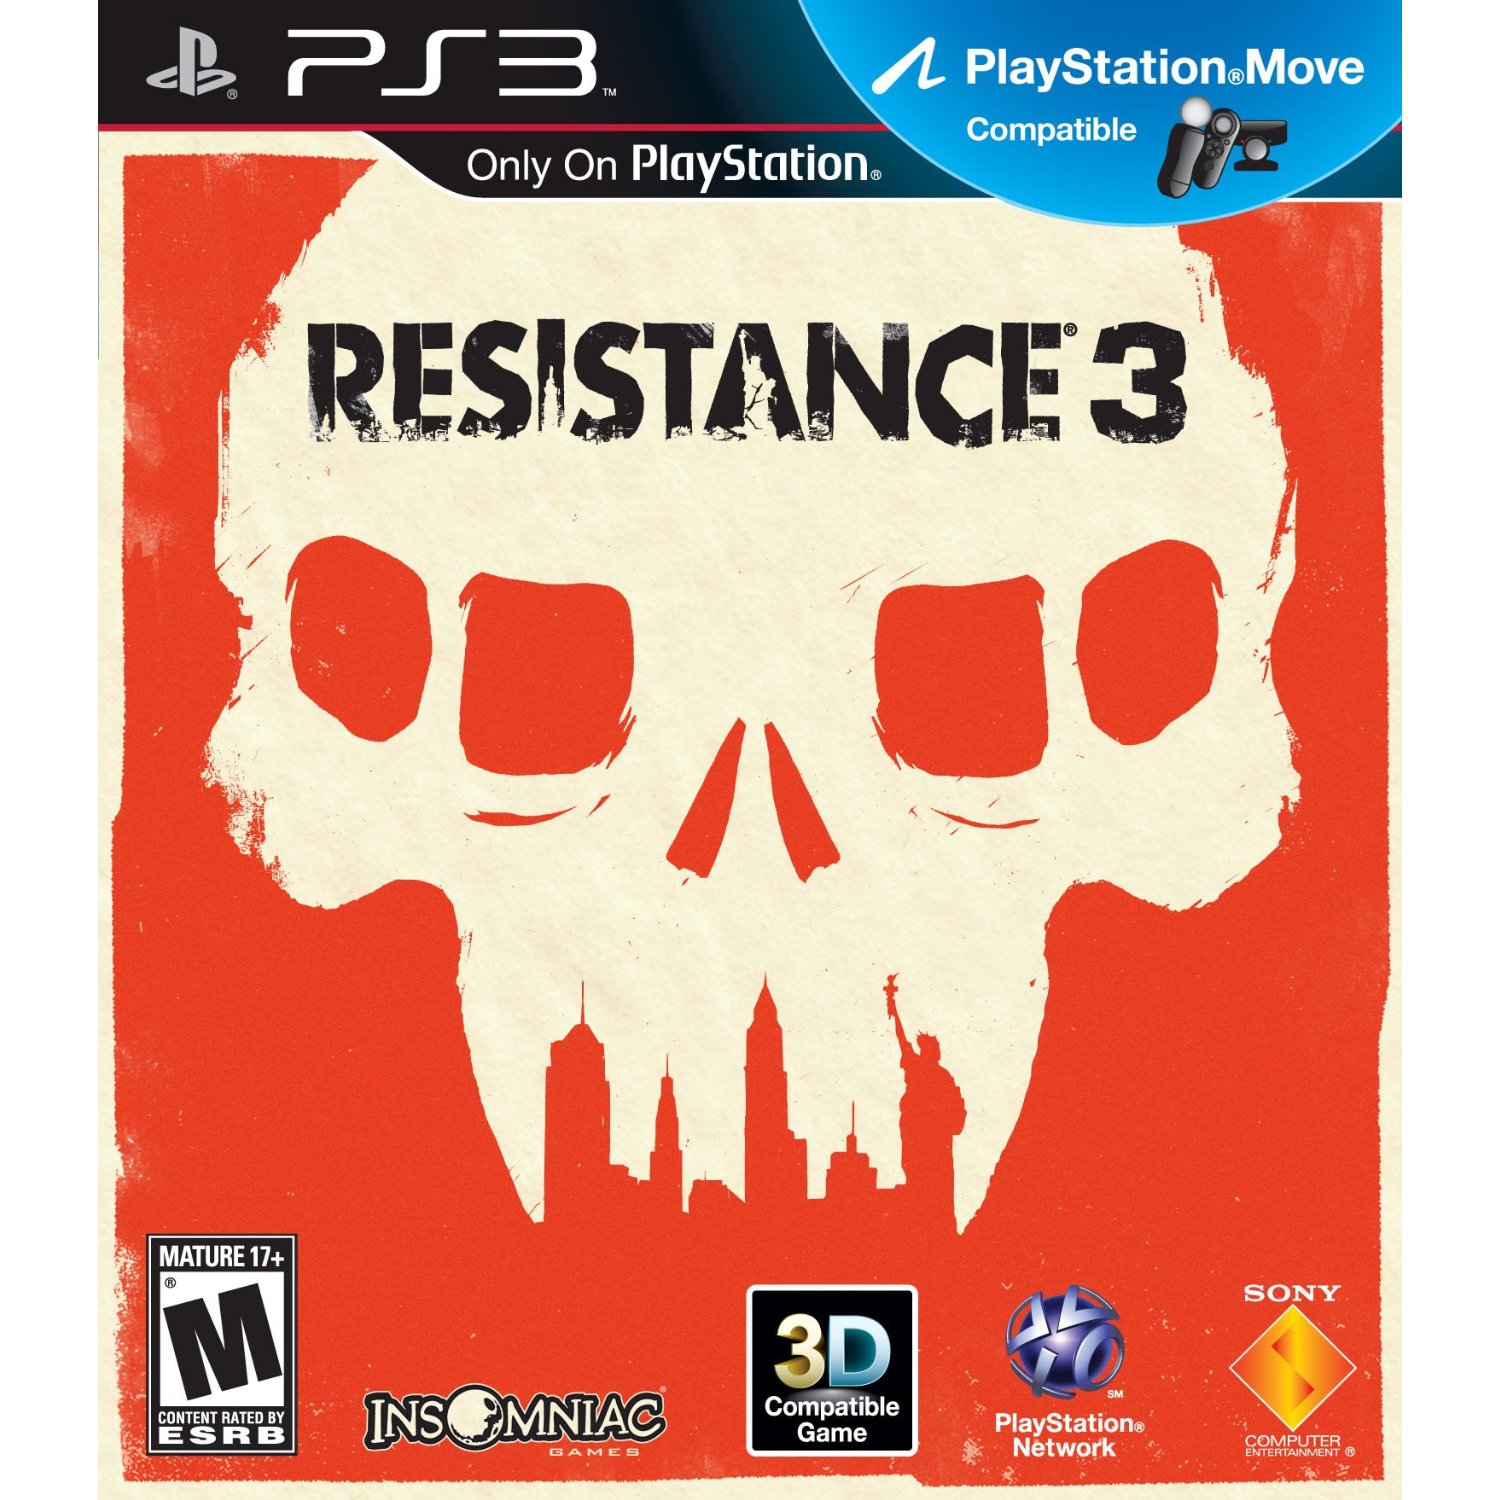 http://thetechjournal.com/wp-content/uploads/images/1108/1312883847-resistance-3--playstation-3-game-available-for-preorder-now-1.jpg